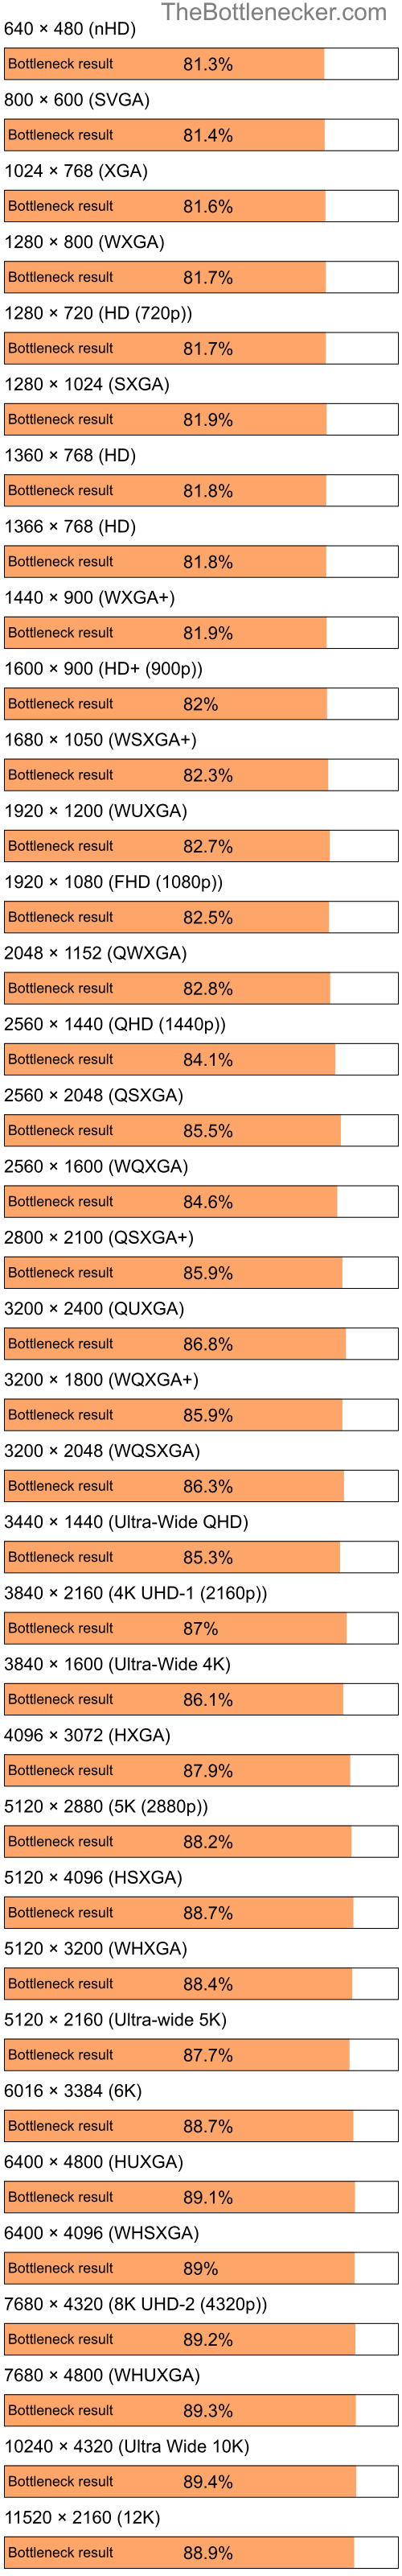 Bottleneck results by resolution for Intel Celeron M 410 and NVIDIA GeForce 7050 in Graphic Card Intense Tasks